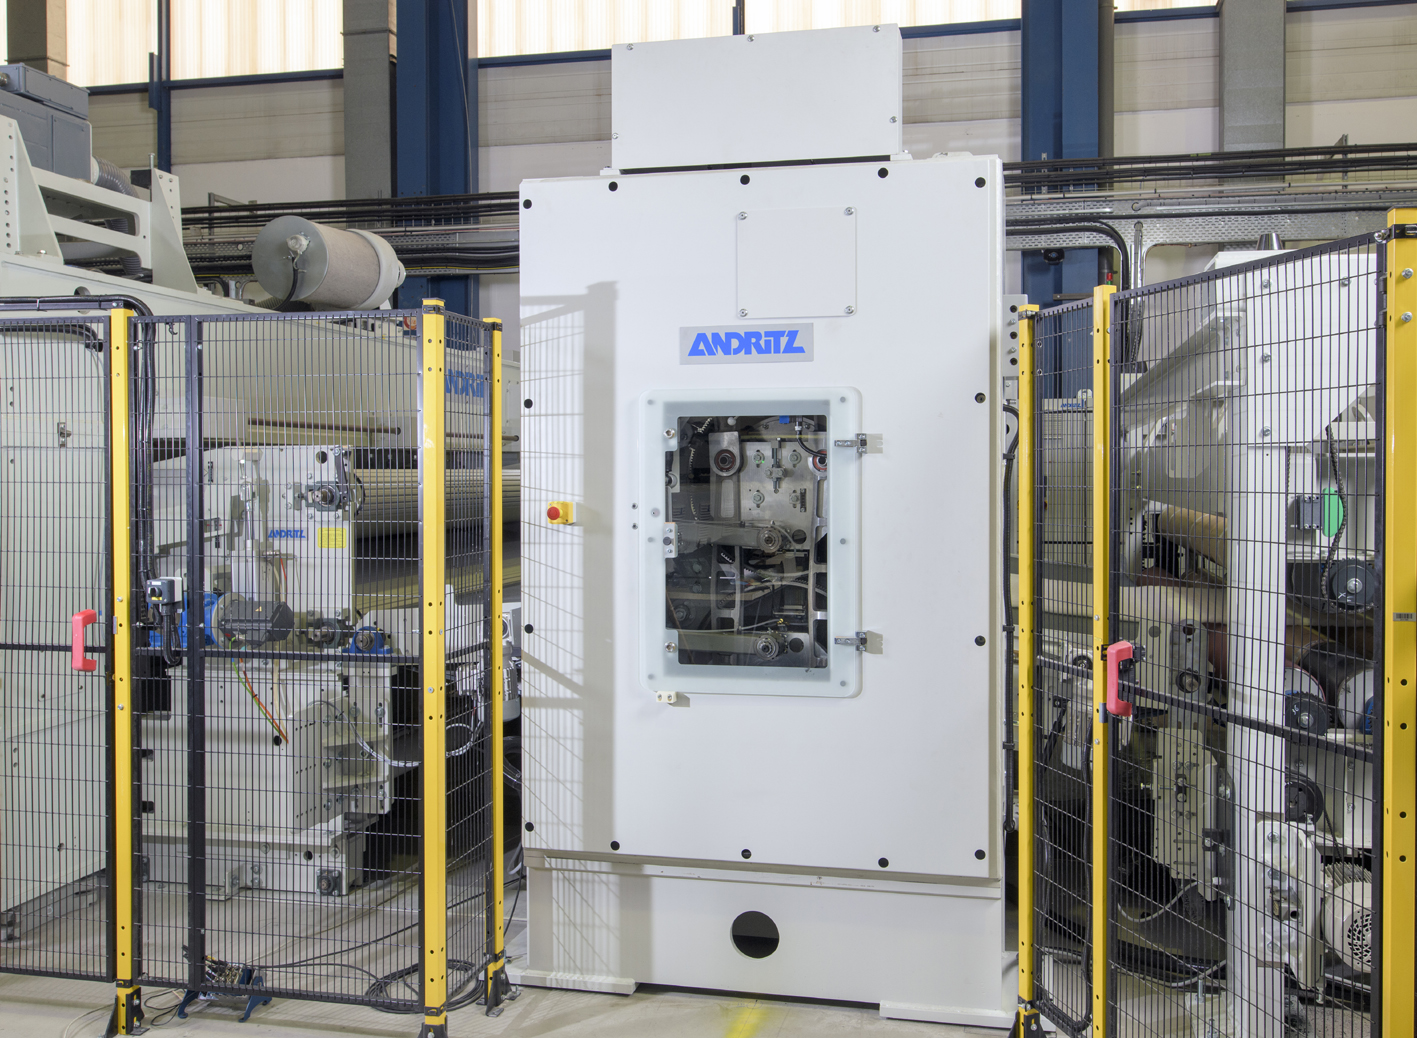 PA.3000 elliptical cylinder pre-needler at the Andritz Elbeuf Technical Centre in France. @ Andritz